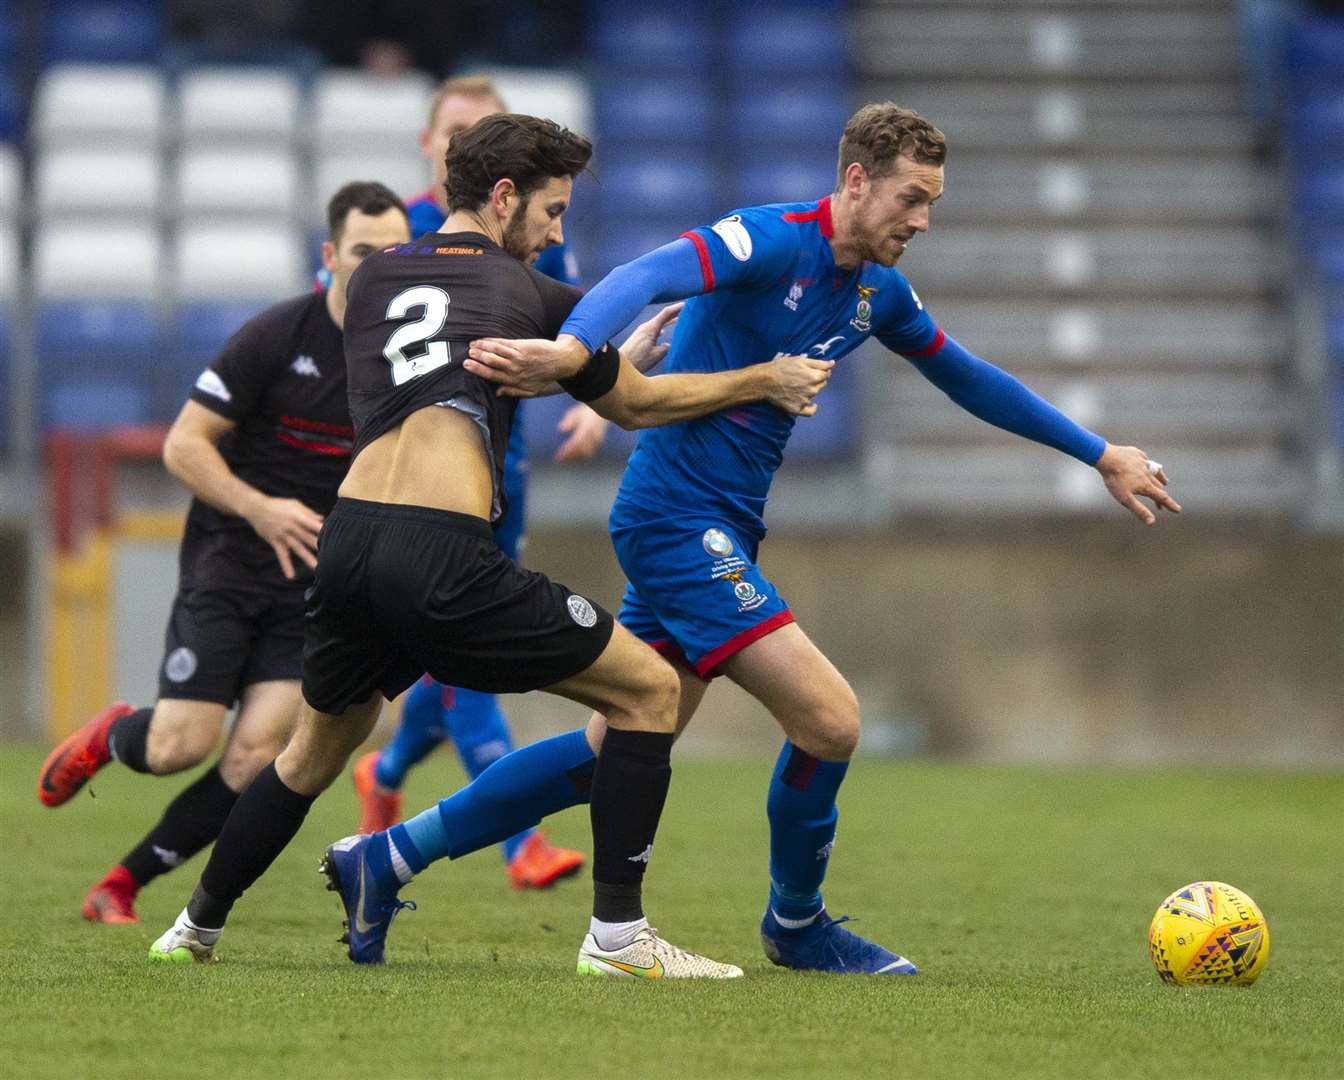 Caley Thistle edged past Clyde on penalties to qualify for the semi finals. Picture: Ken Macpherson